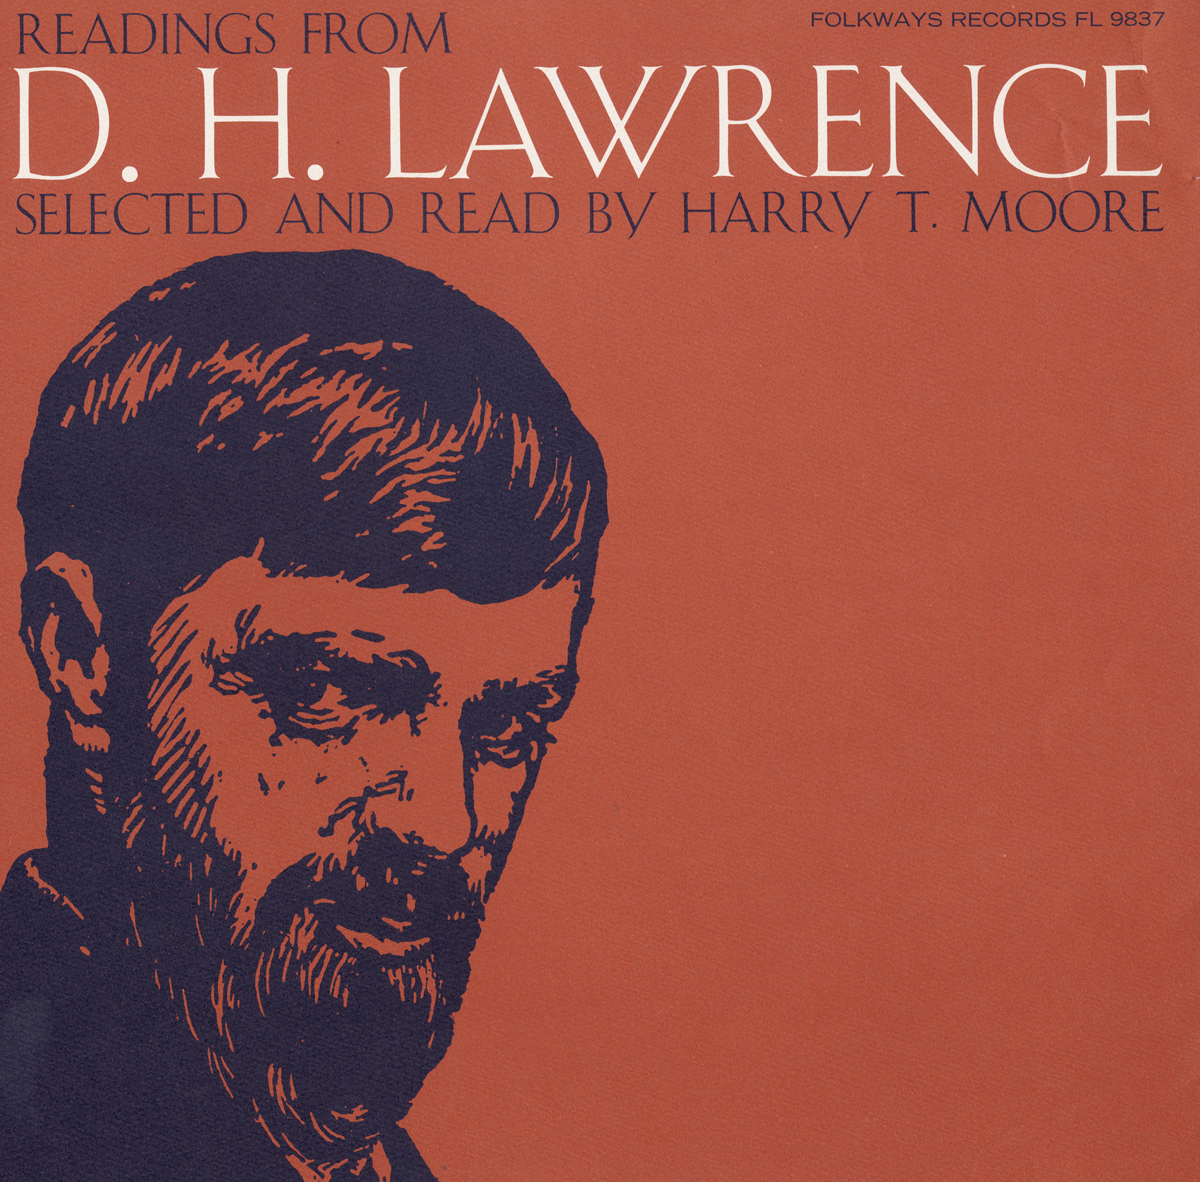 READINGS FROM D.H. LAWRENCE